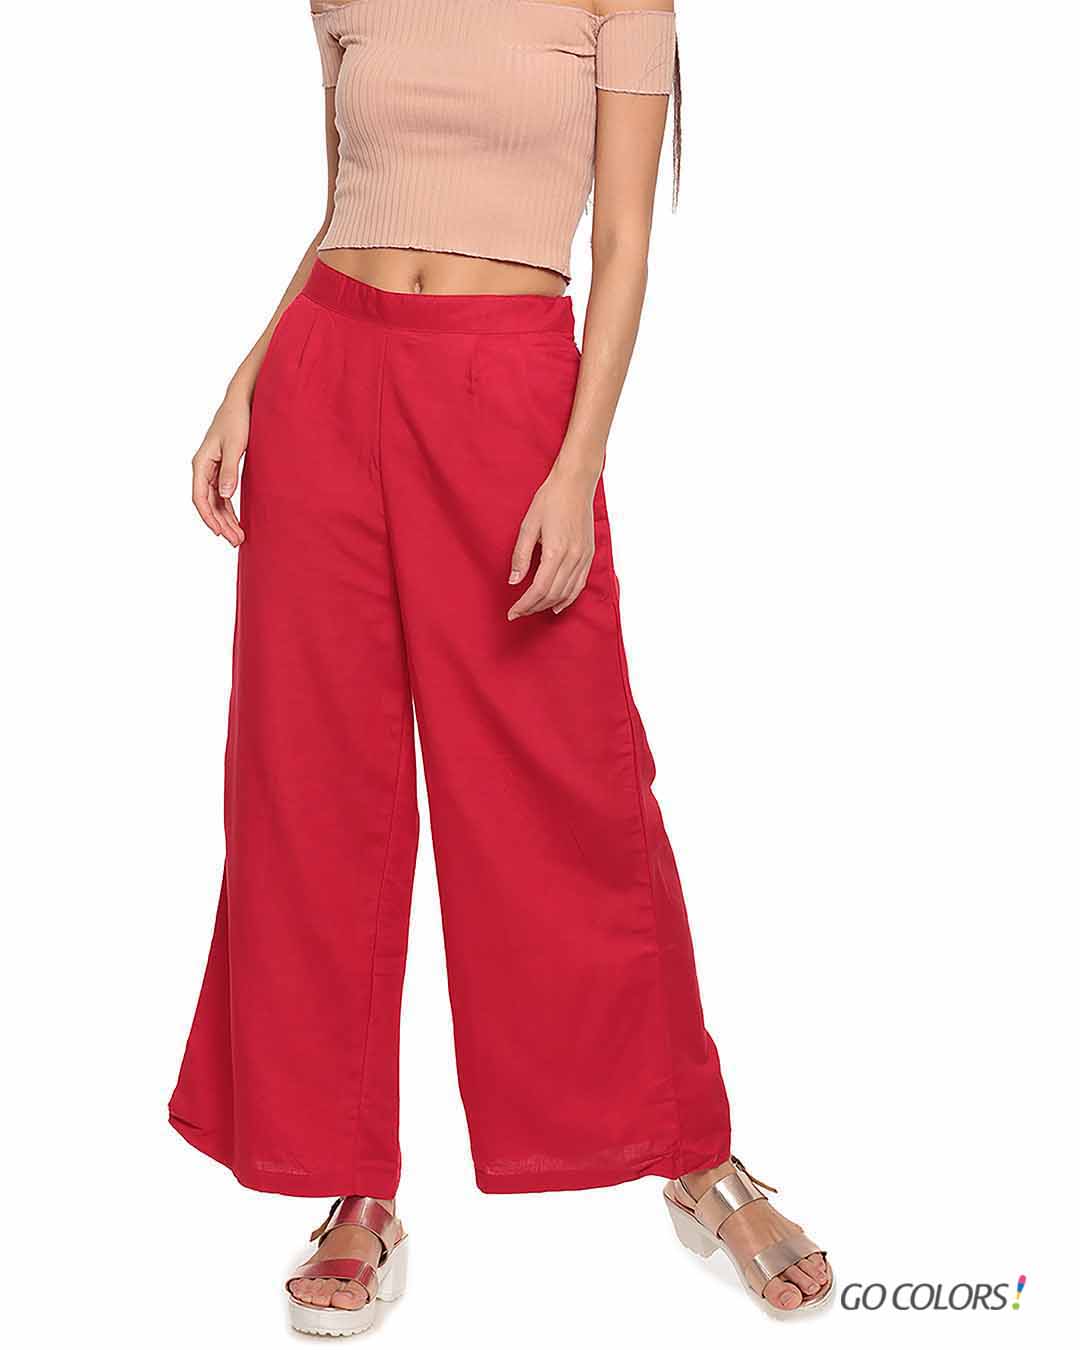 GO COLORS Girls Harem Pants - Young Fuchsia - Ages 2-14 yrs (5-6 Years) :  Amazon.in: Clothing & Accessories